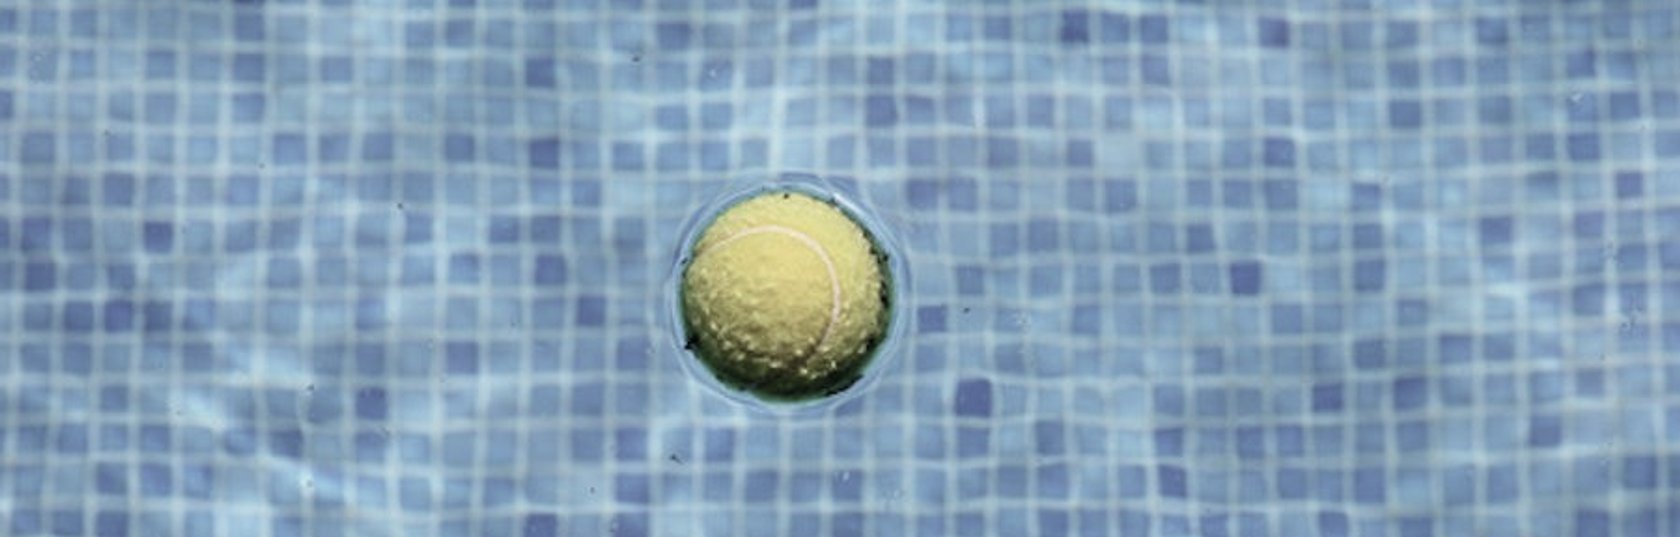 Pool Cleaning Hacks For DIY Enthusiasts